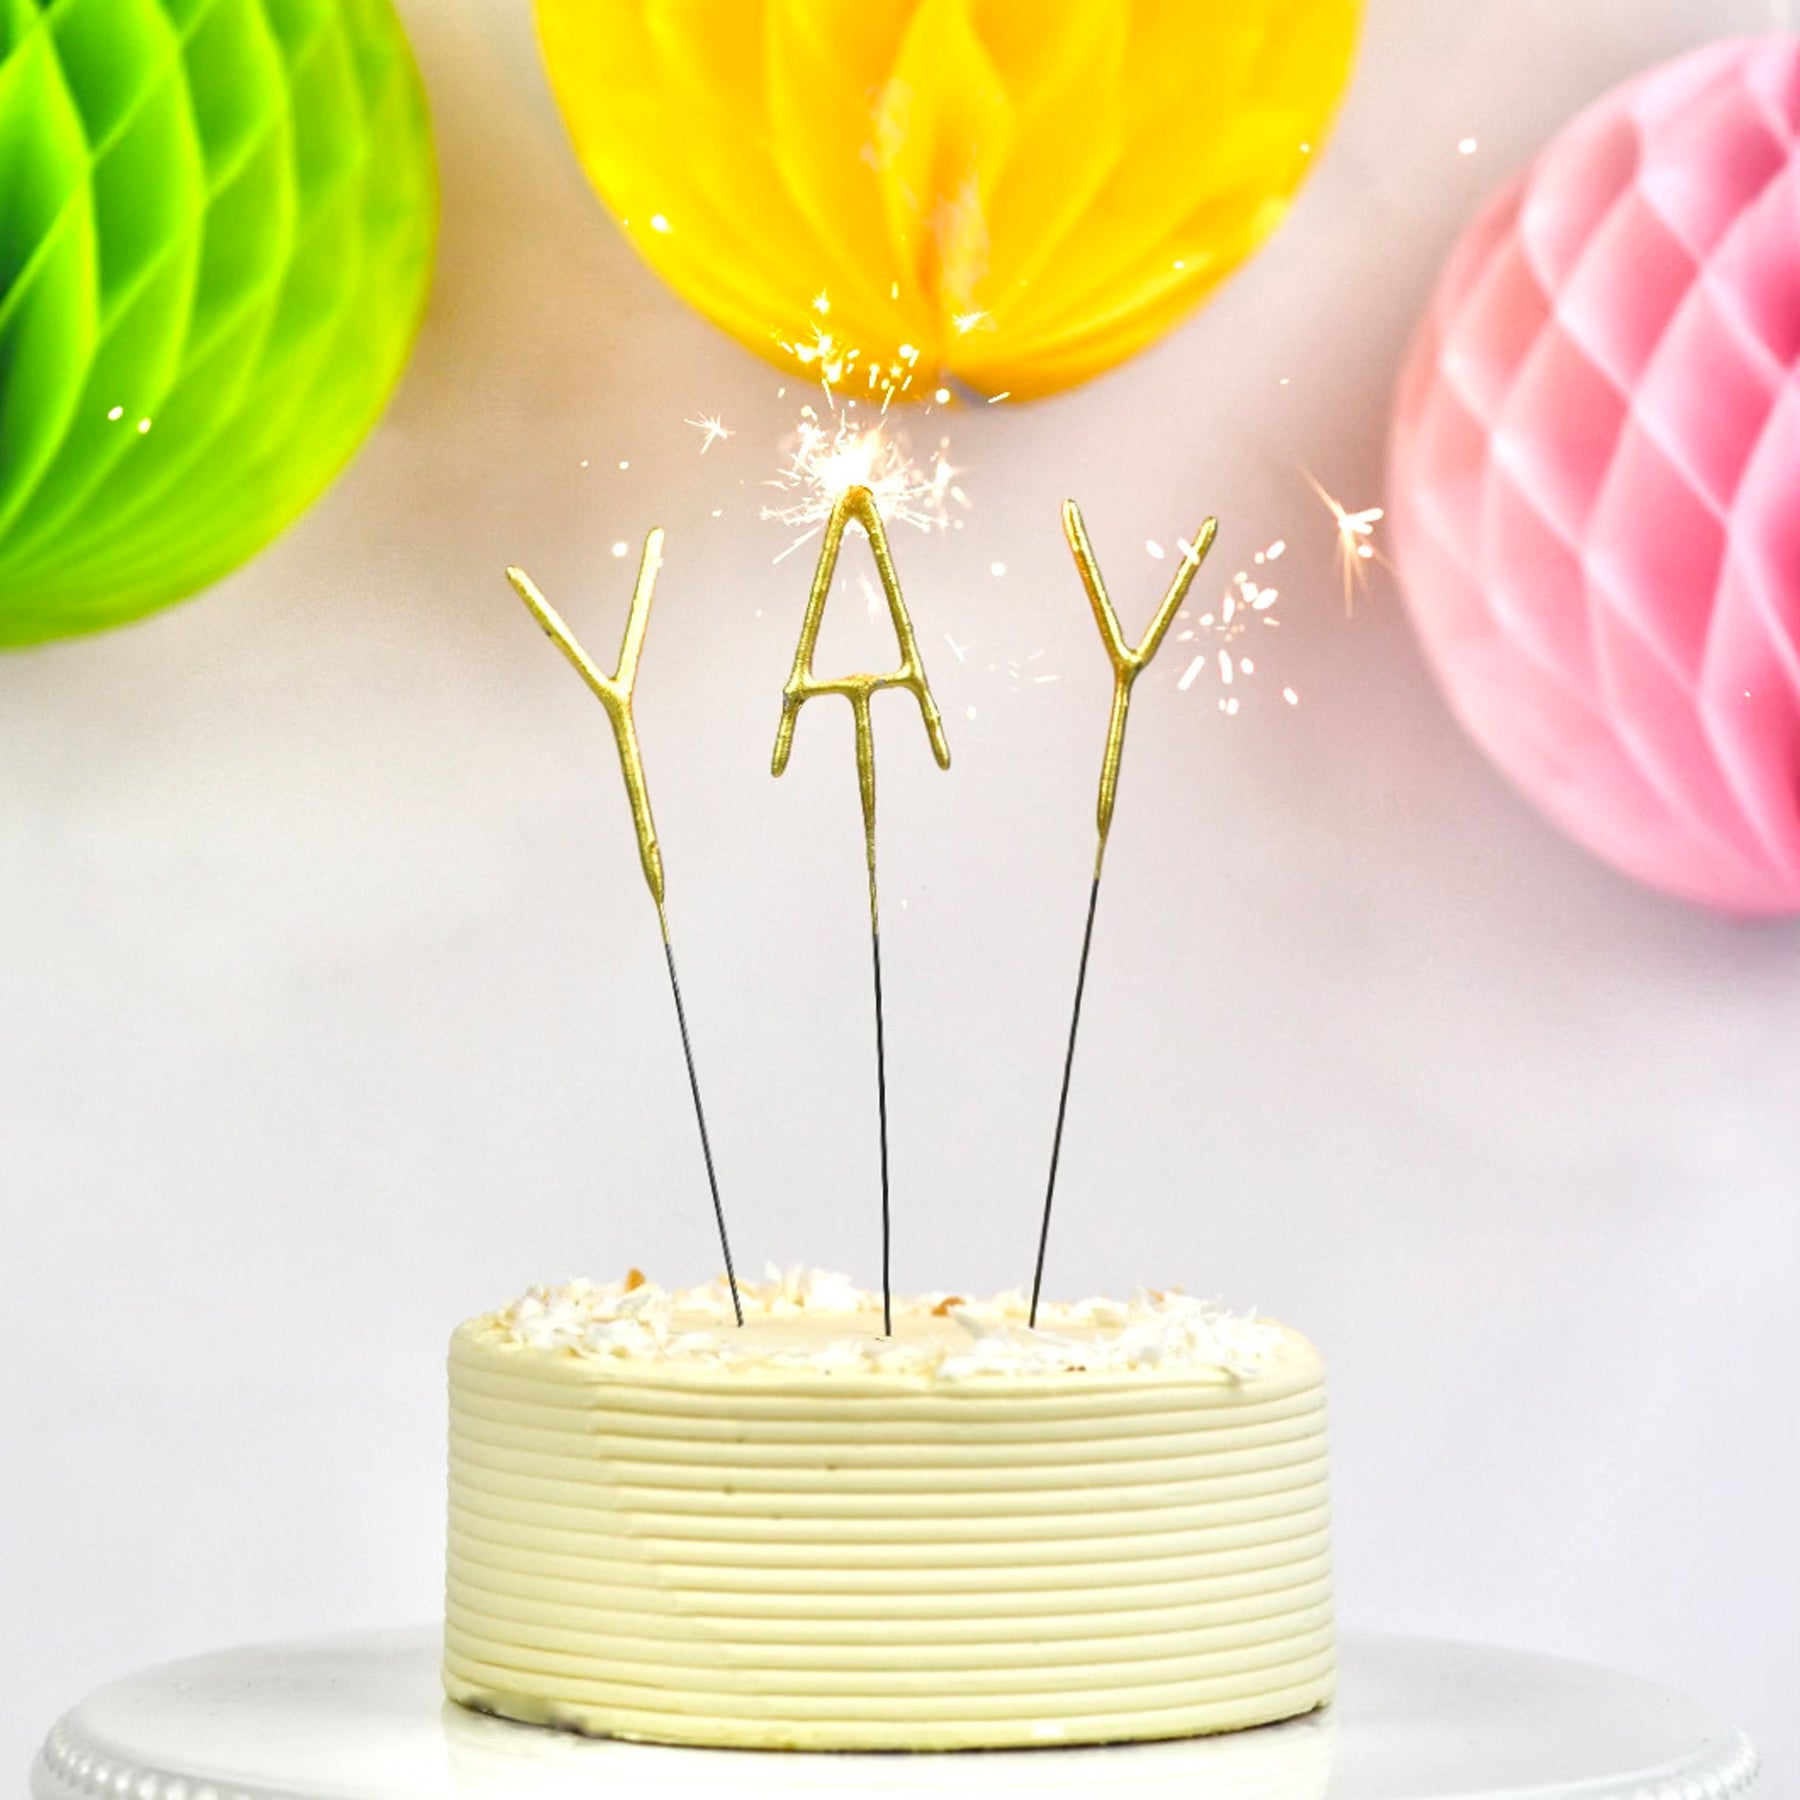 A birthday cake with sparklers on top of it photo – Free Food Image on  Unsplash